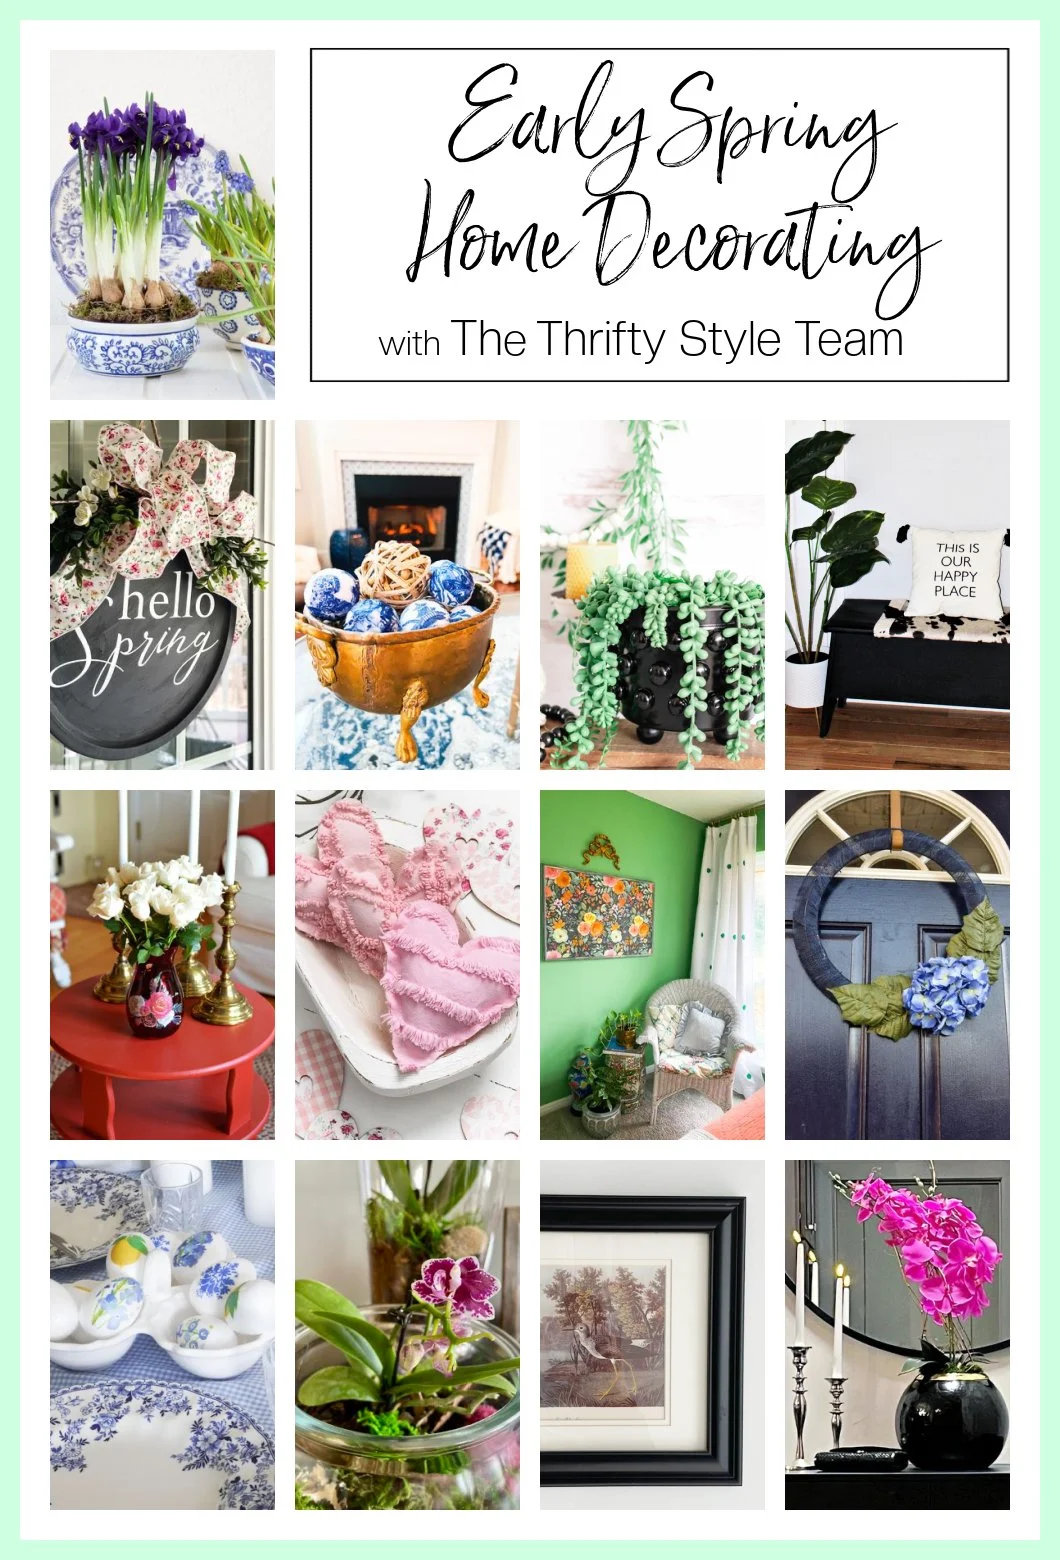 Early Spring Home Decor with The Thrifty Style Team Collage